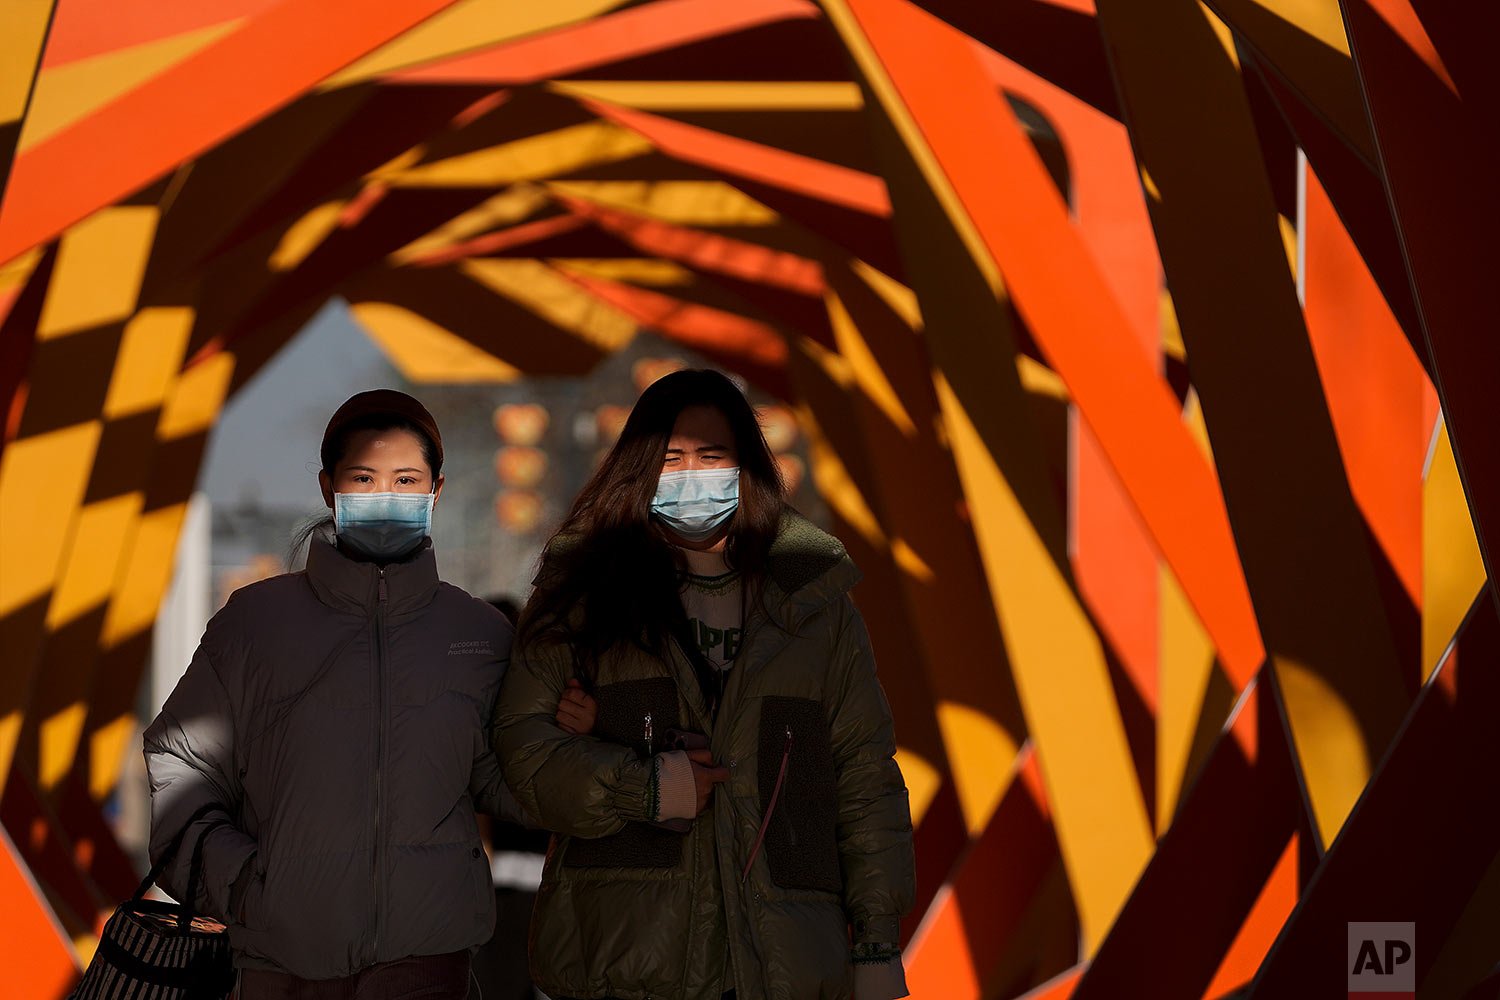  Women wearing face masks to help protect from the coronavirus walk by an art installation depicting a prosperity chamber on display outside a mall in Beijing, Monday, Dec. 27, 2021. (AP Photo/Andy Wong) 